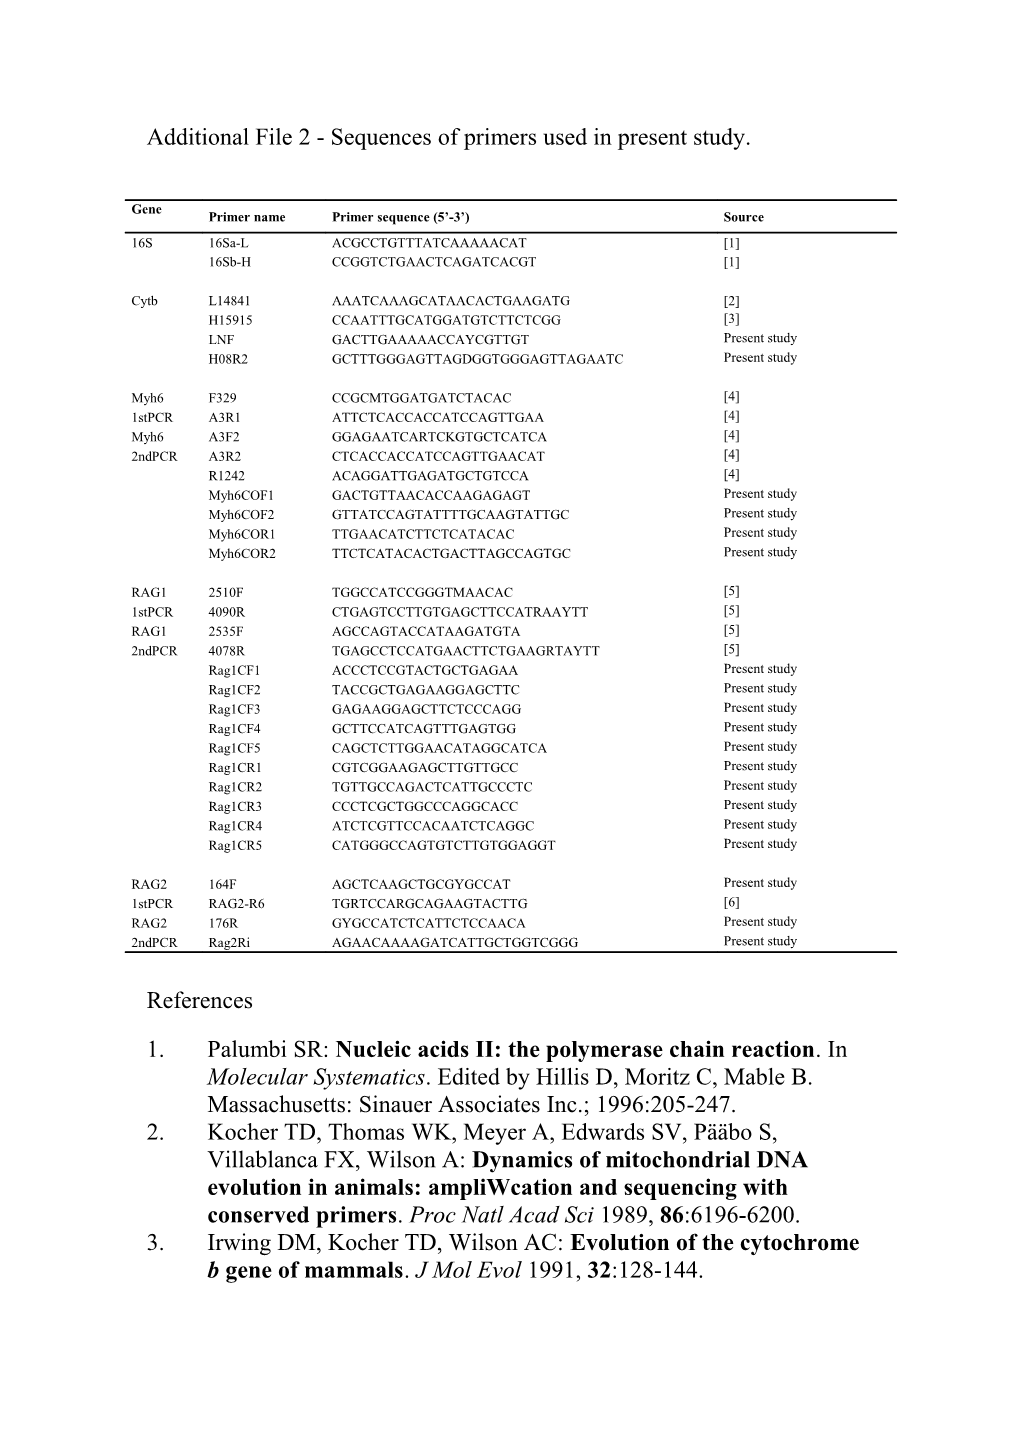 Additional File 2 - Sequences of Primers Used in Present Study